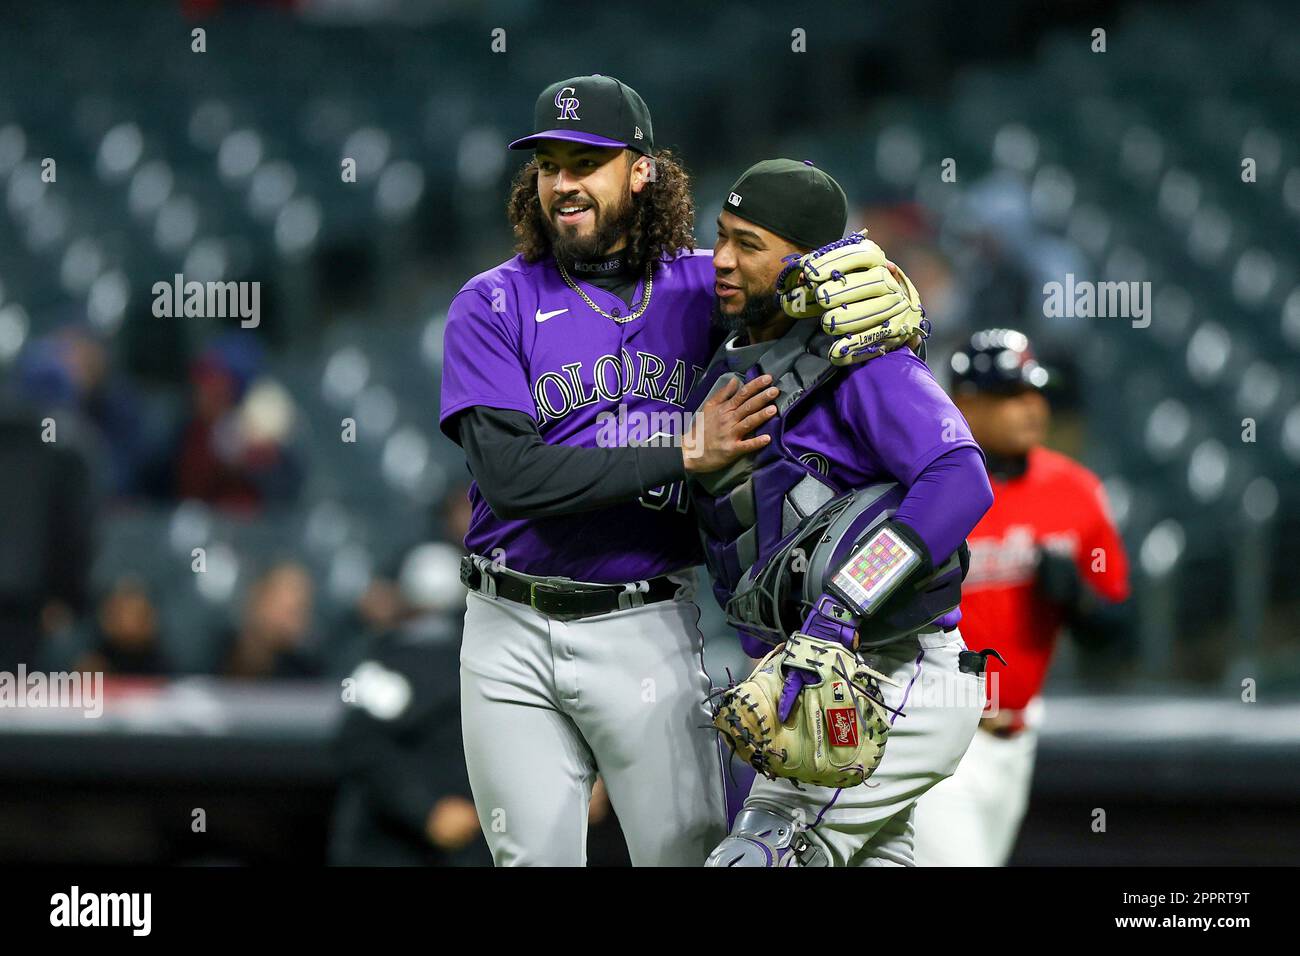 Colorado Rockies first baseman Mike Moustakas celebrates after